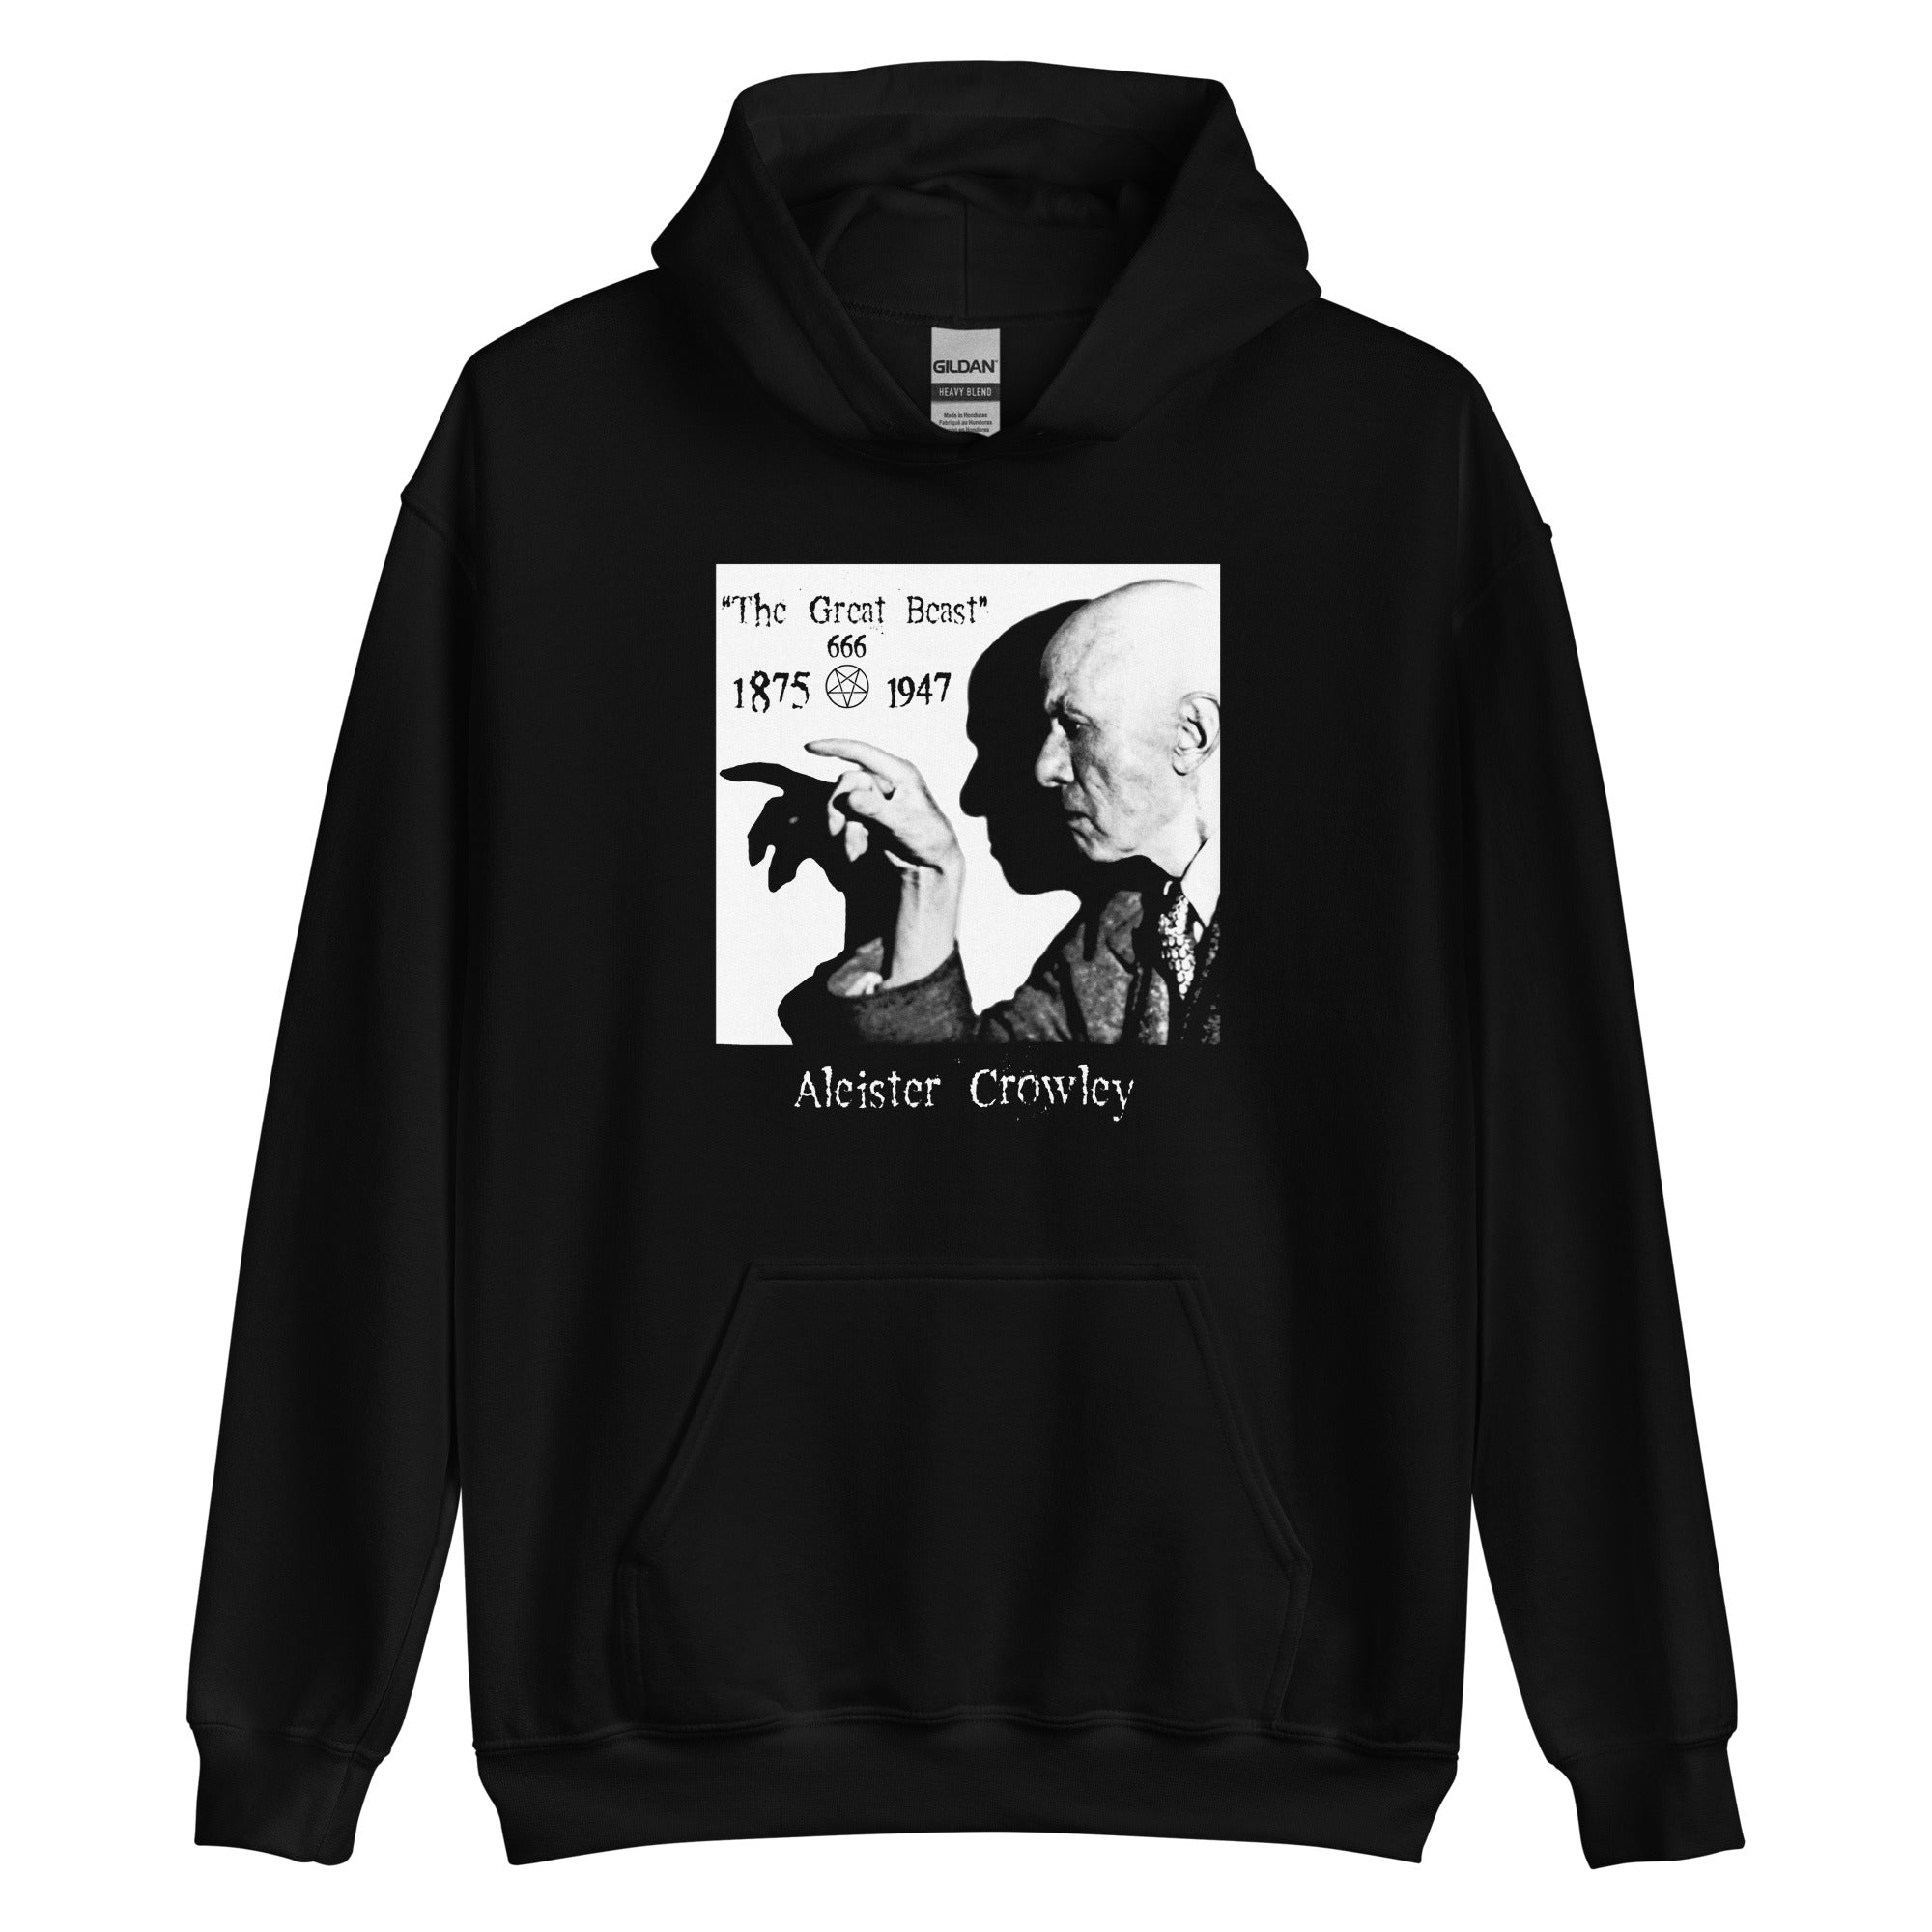 Aleister Crowley Infamous Occult Leader of Thelema Sex Magic Women's Black Hoodie - Edge of Life Designs